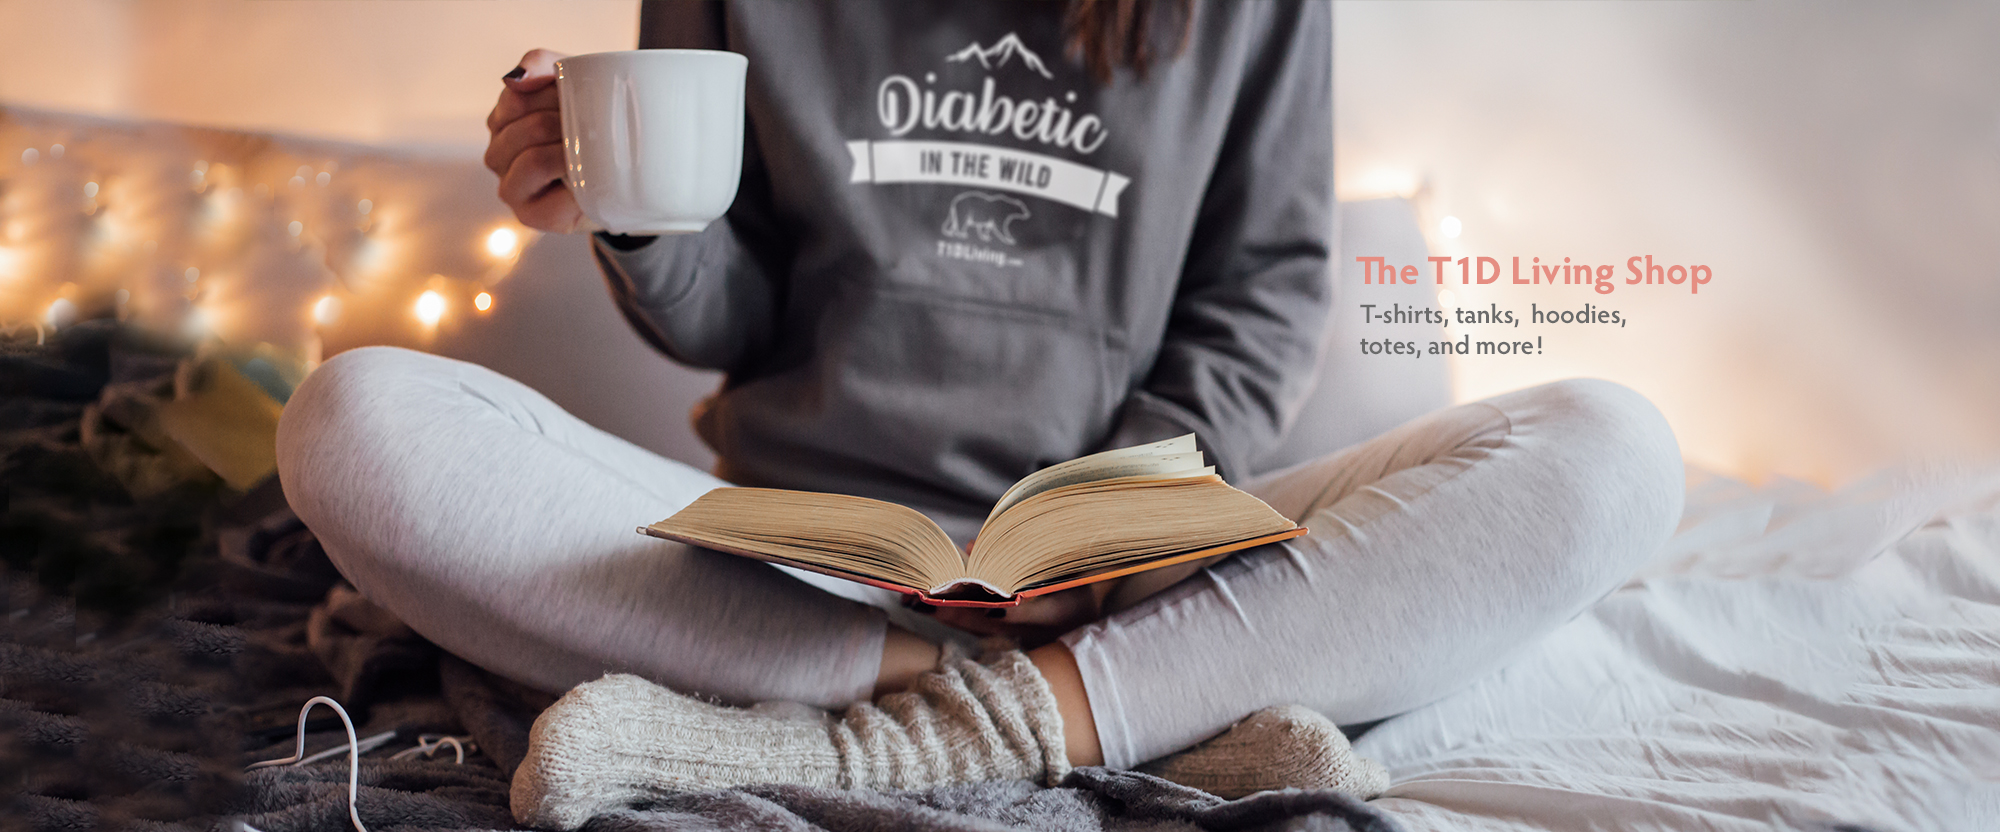 Woman in cozy sweatpants and T1D branded hoodie on bed reading a book and drinking tea